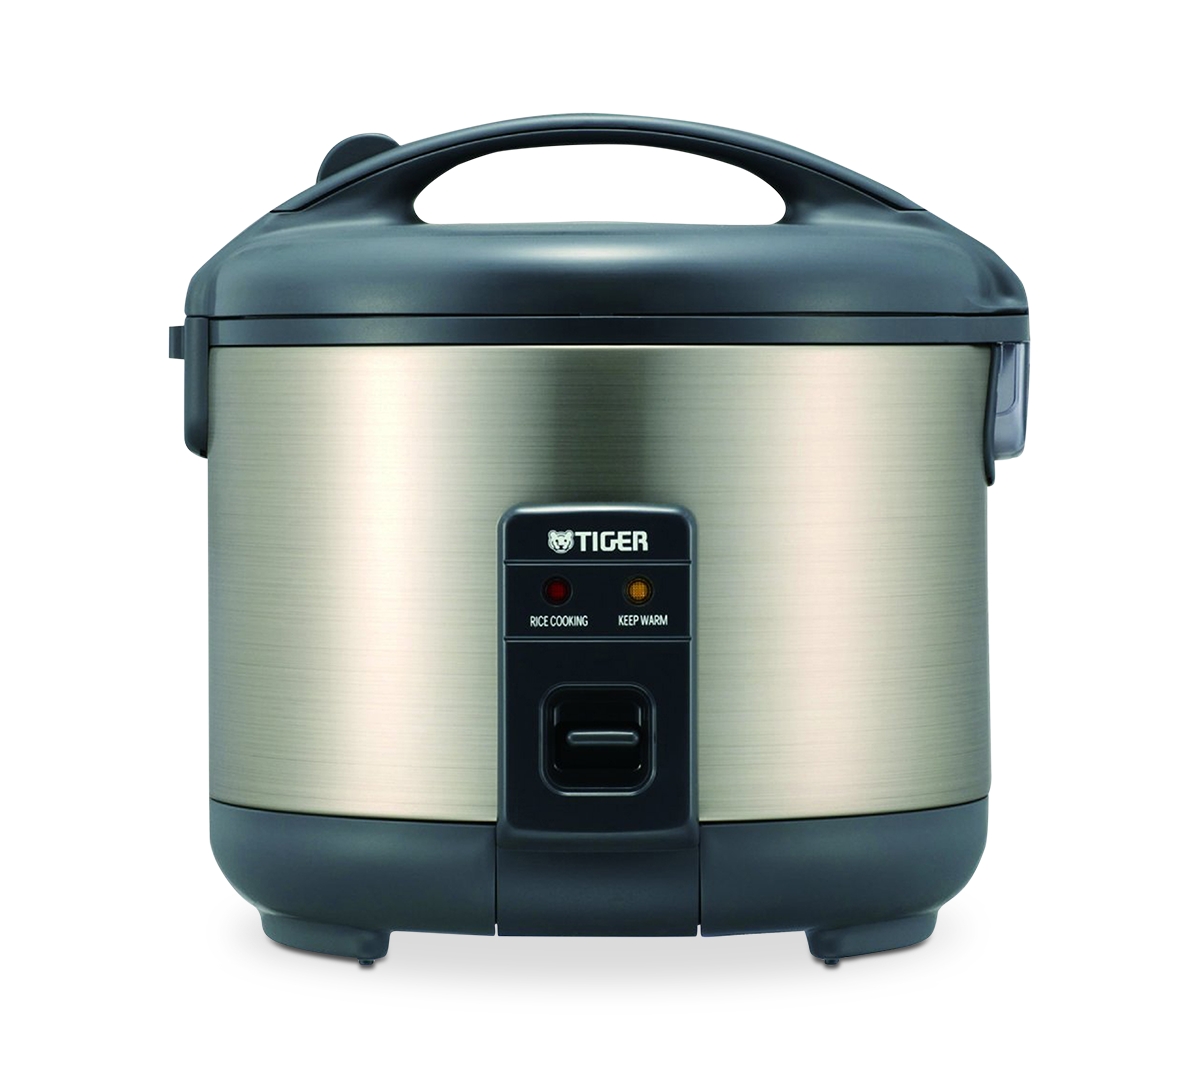 Tiger Jnp-s55u 3-cup Rice Cooker In Stainless,black